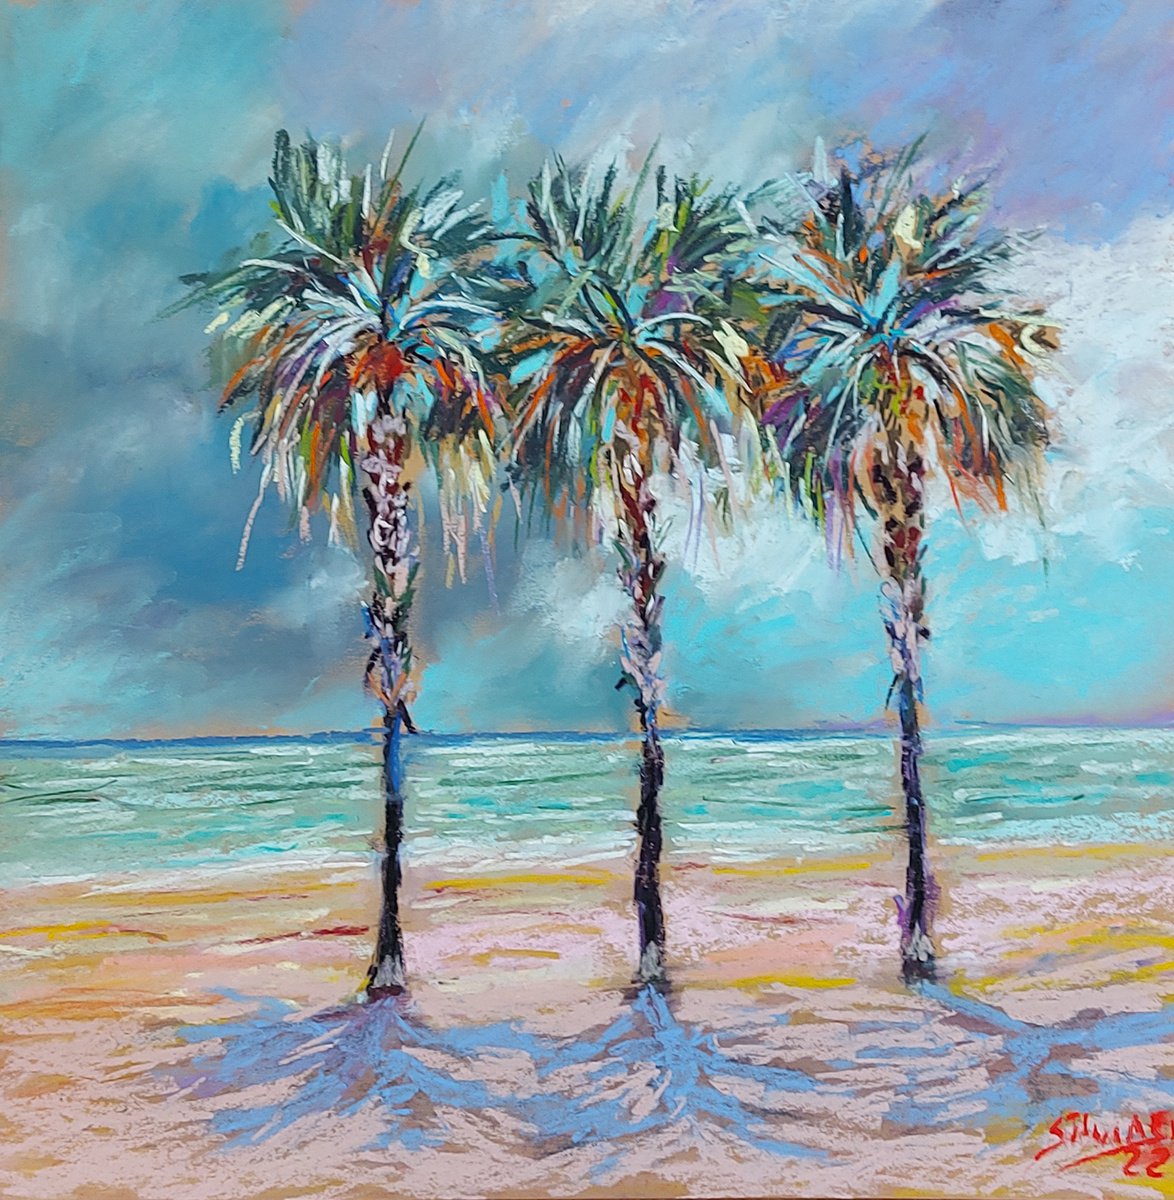 Three palm trees after the storm by Silvia Flores Vitiello